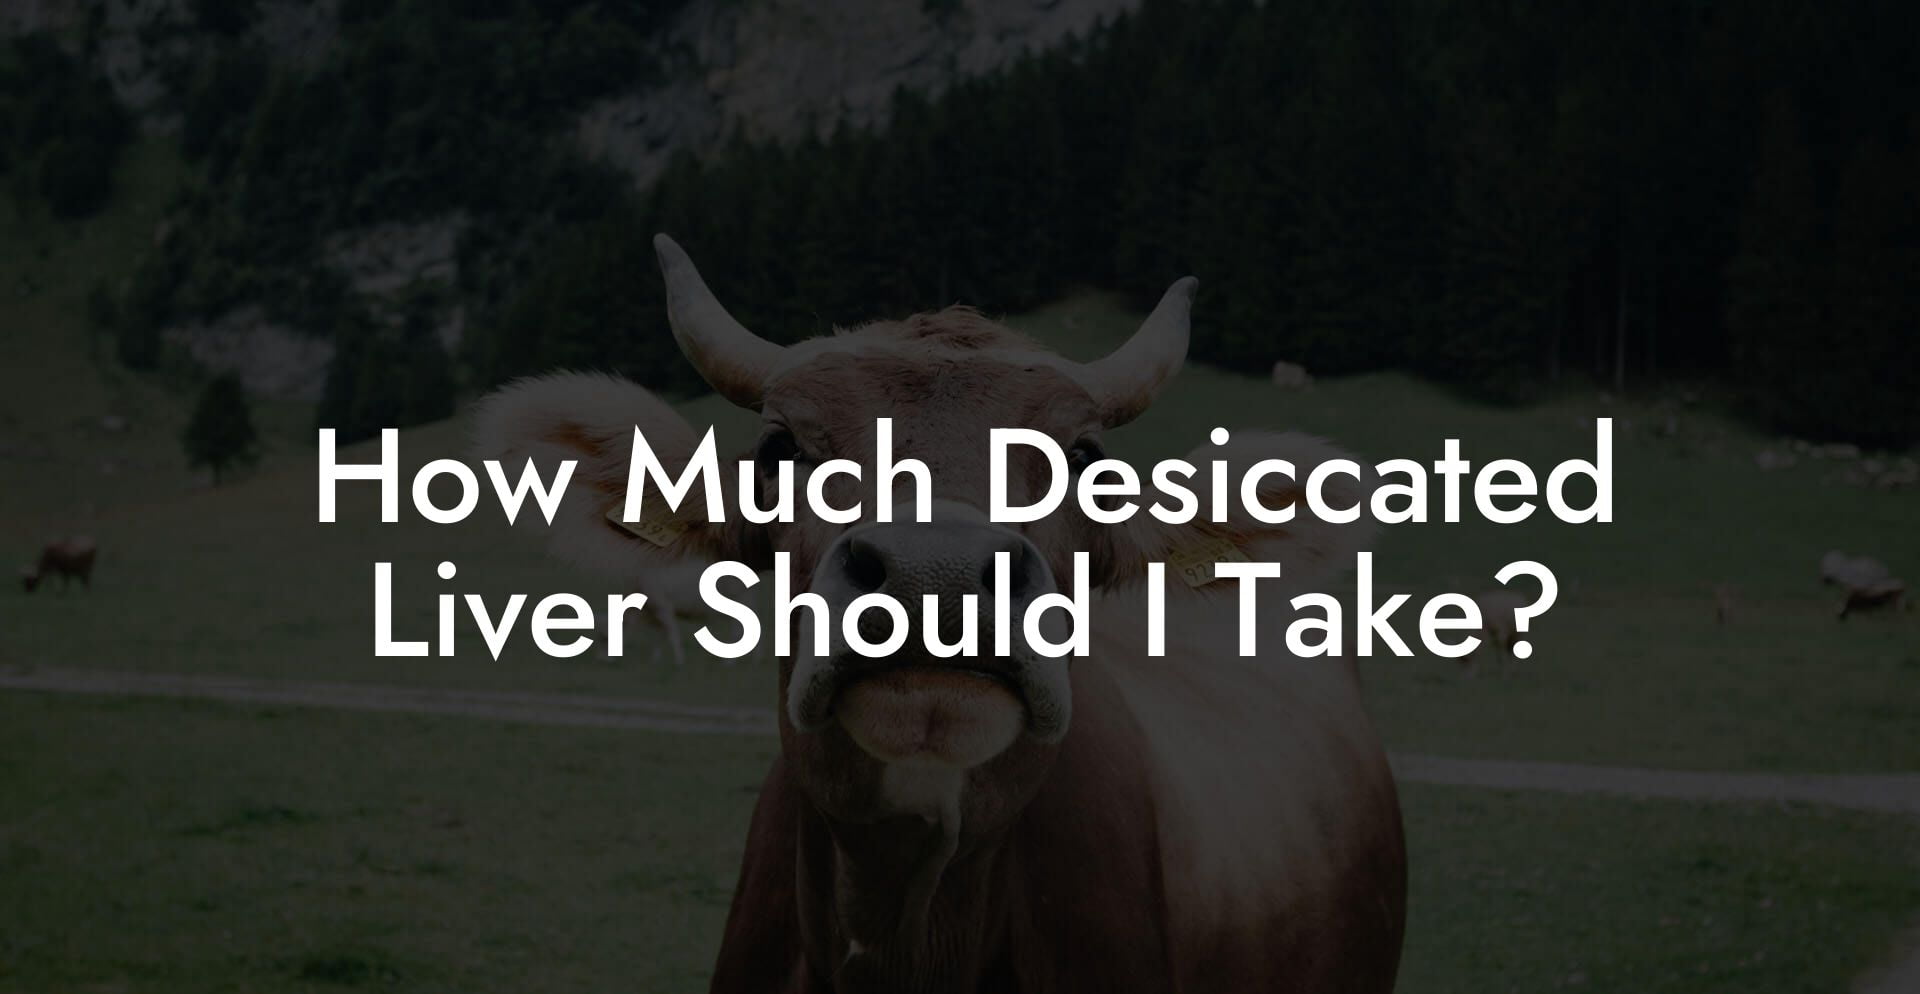 How Much Desiccated Liver Should I Take?